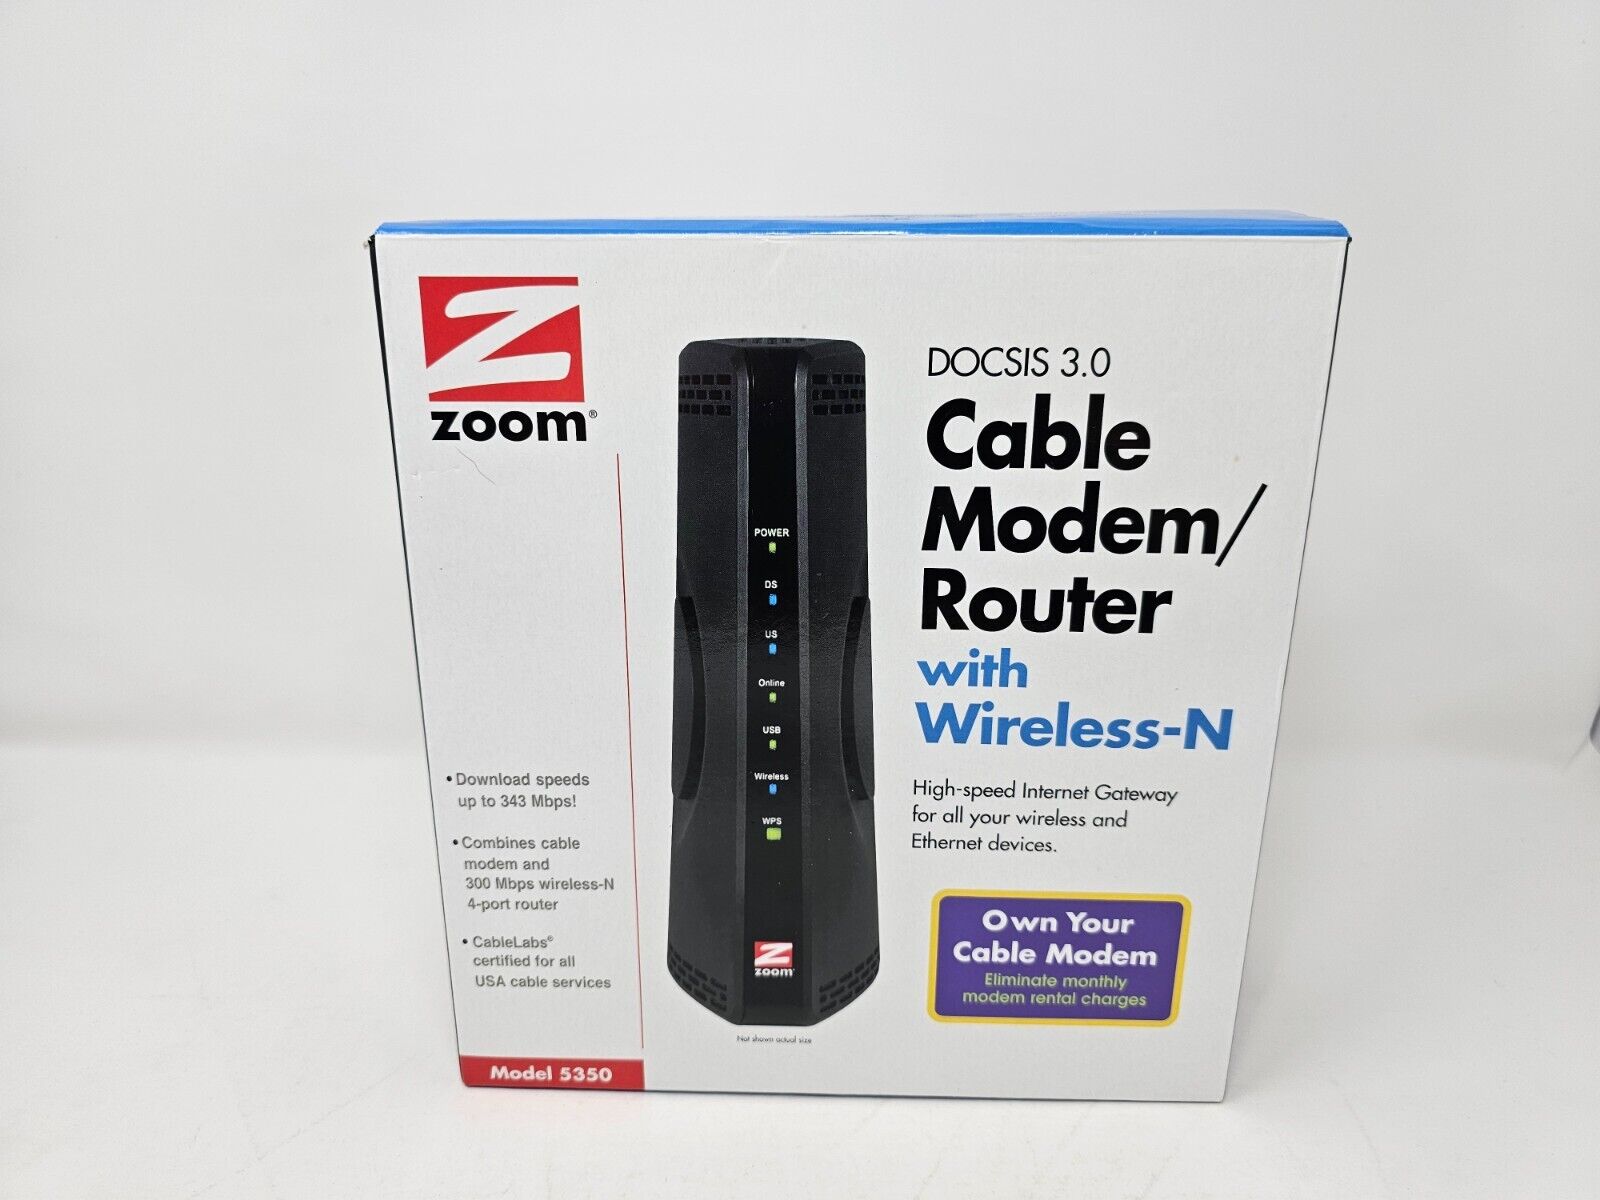 Zoom DOCSIS 3.0 Cable Modem/Router Wireless-N Model 5350